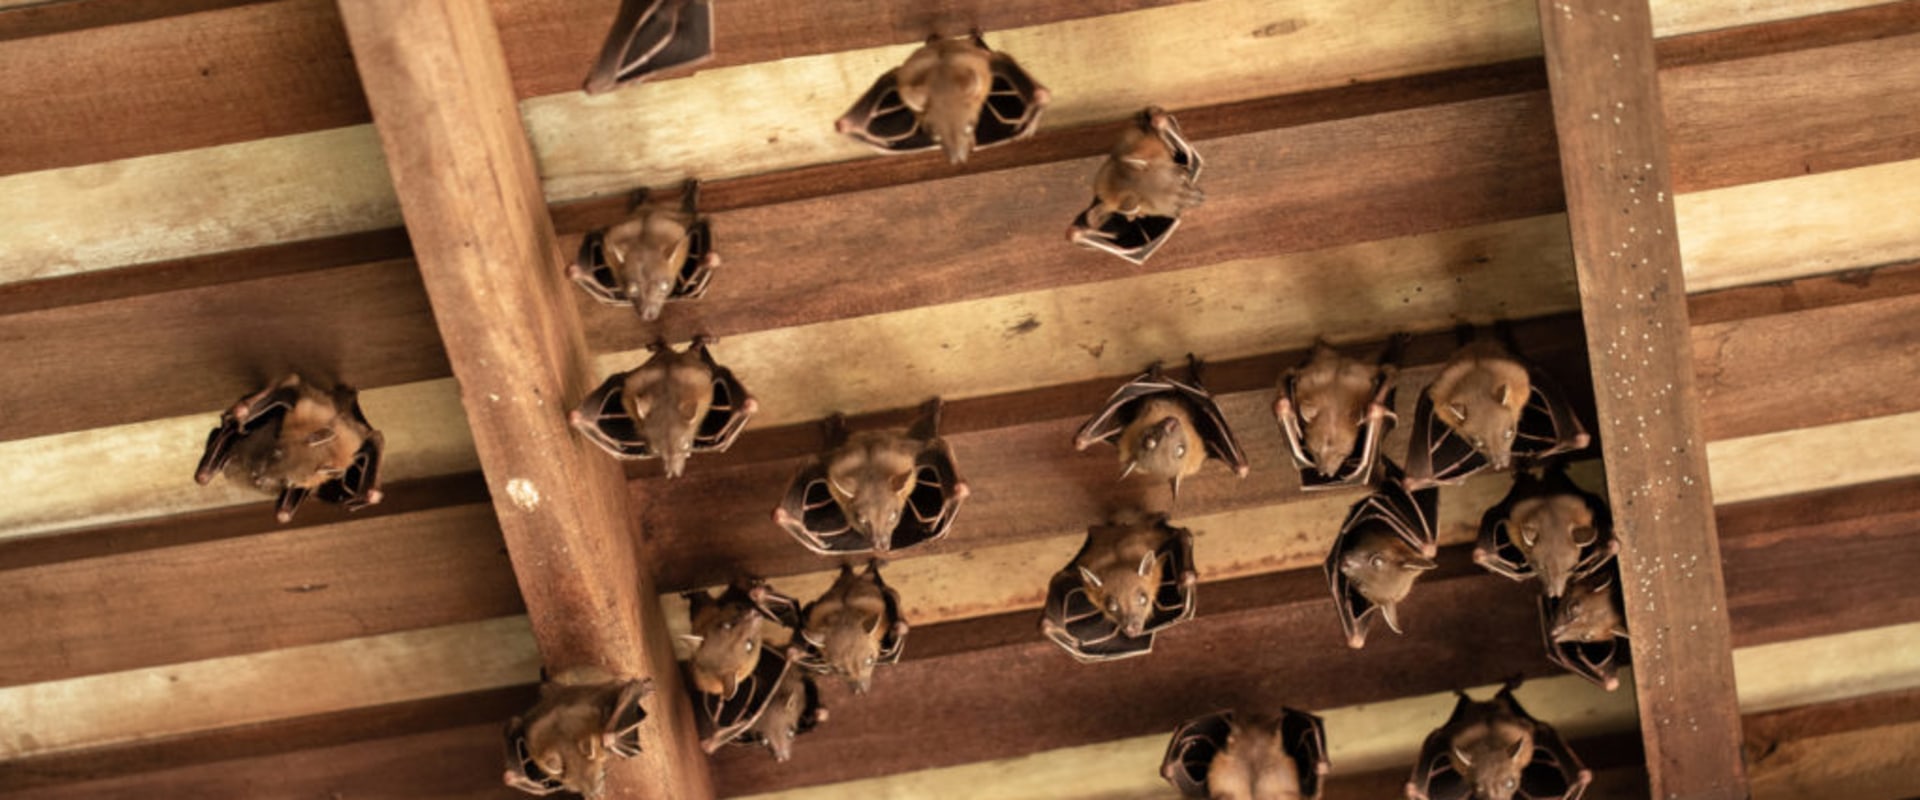 What keeps bats out of your attic?